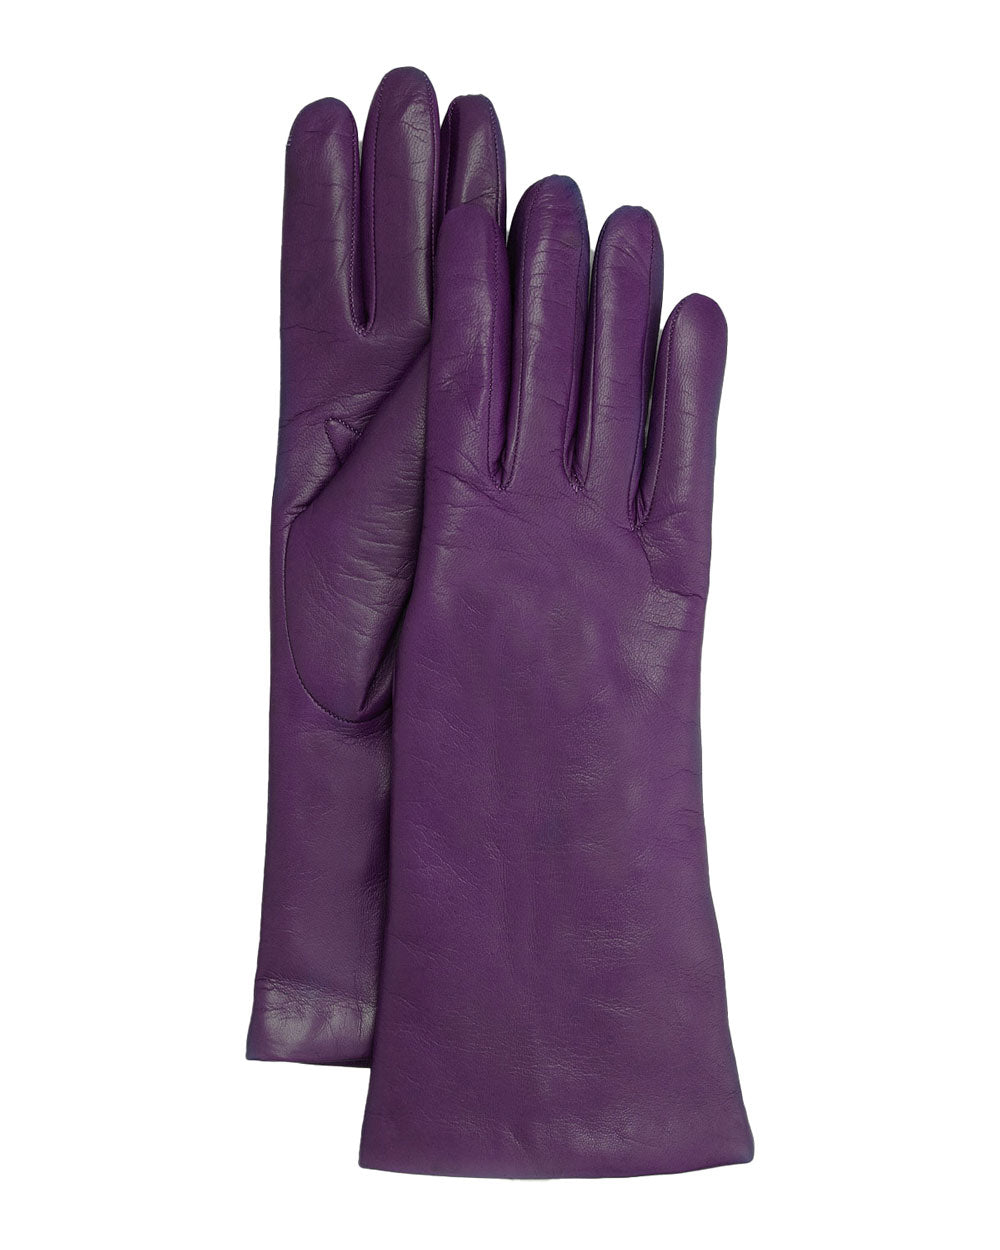 4 Button Cashmere Lined Gloves in Iris